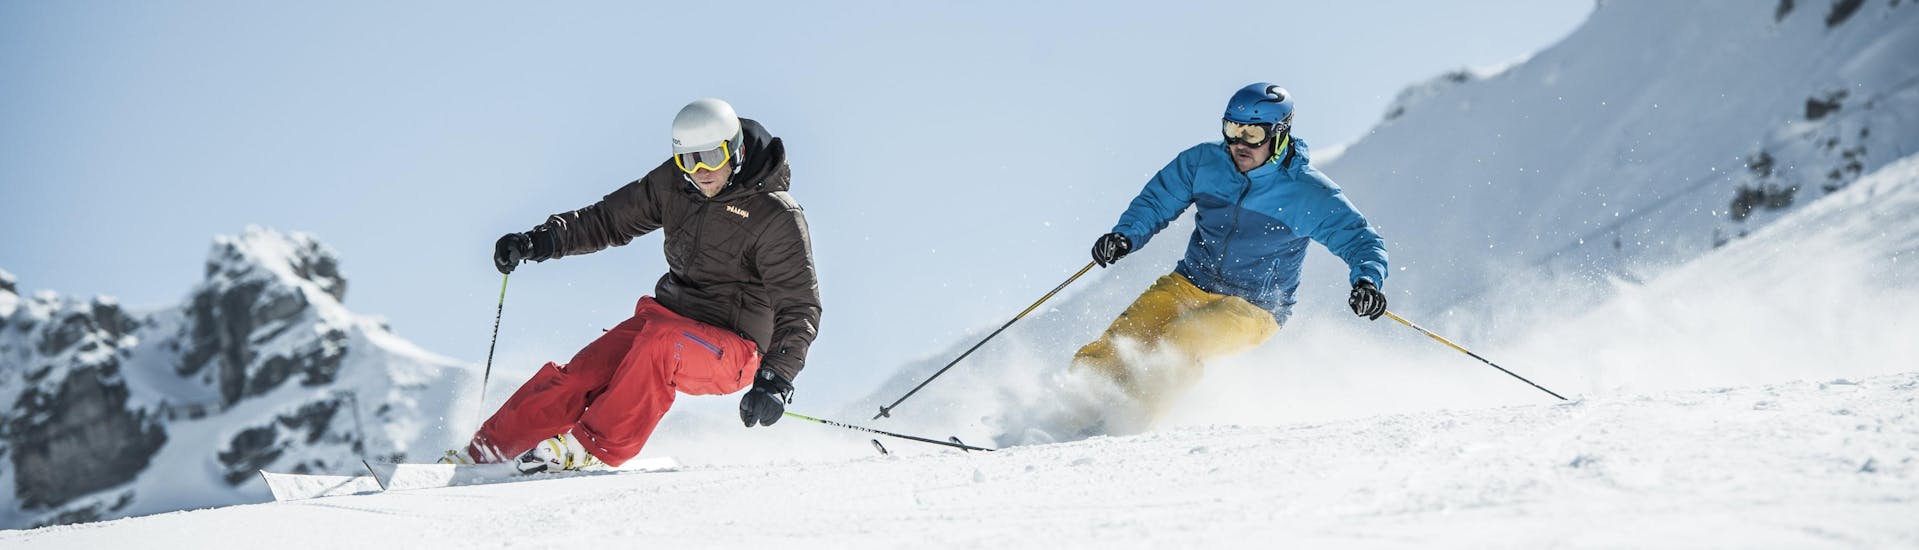 A skier practices the correct skiing technique during one of the private lessons in Val Thorens.